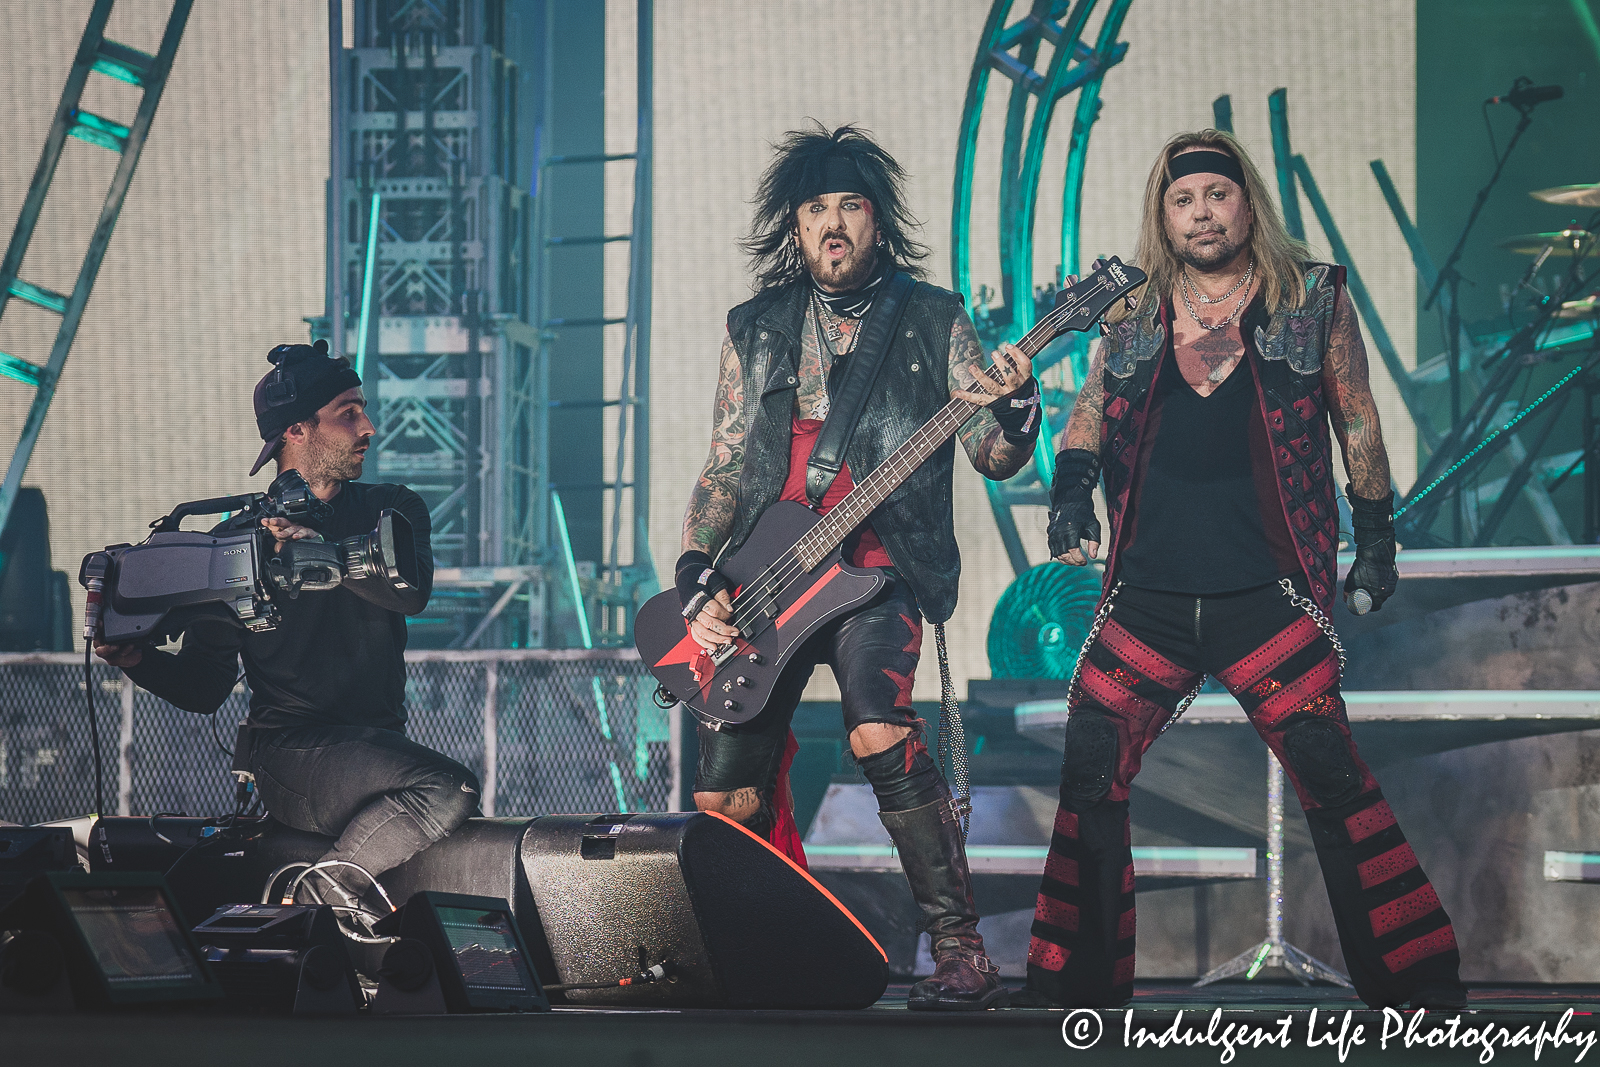 Mötley Crüe members Nikki Sixx and Vince Neil performing live in concert together at Kauffman Stadium in Kansas City, MO on July 19, 2022.